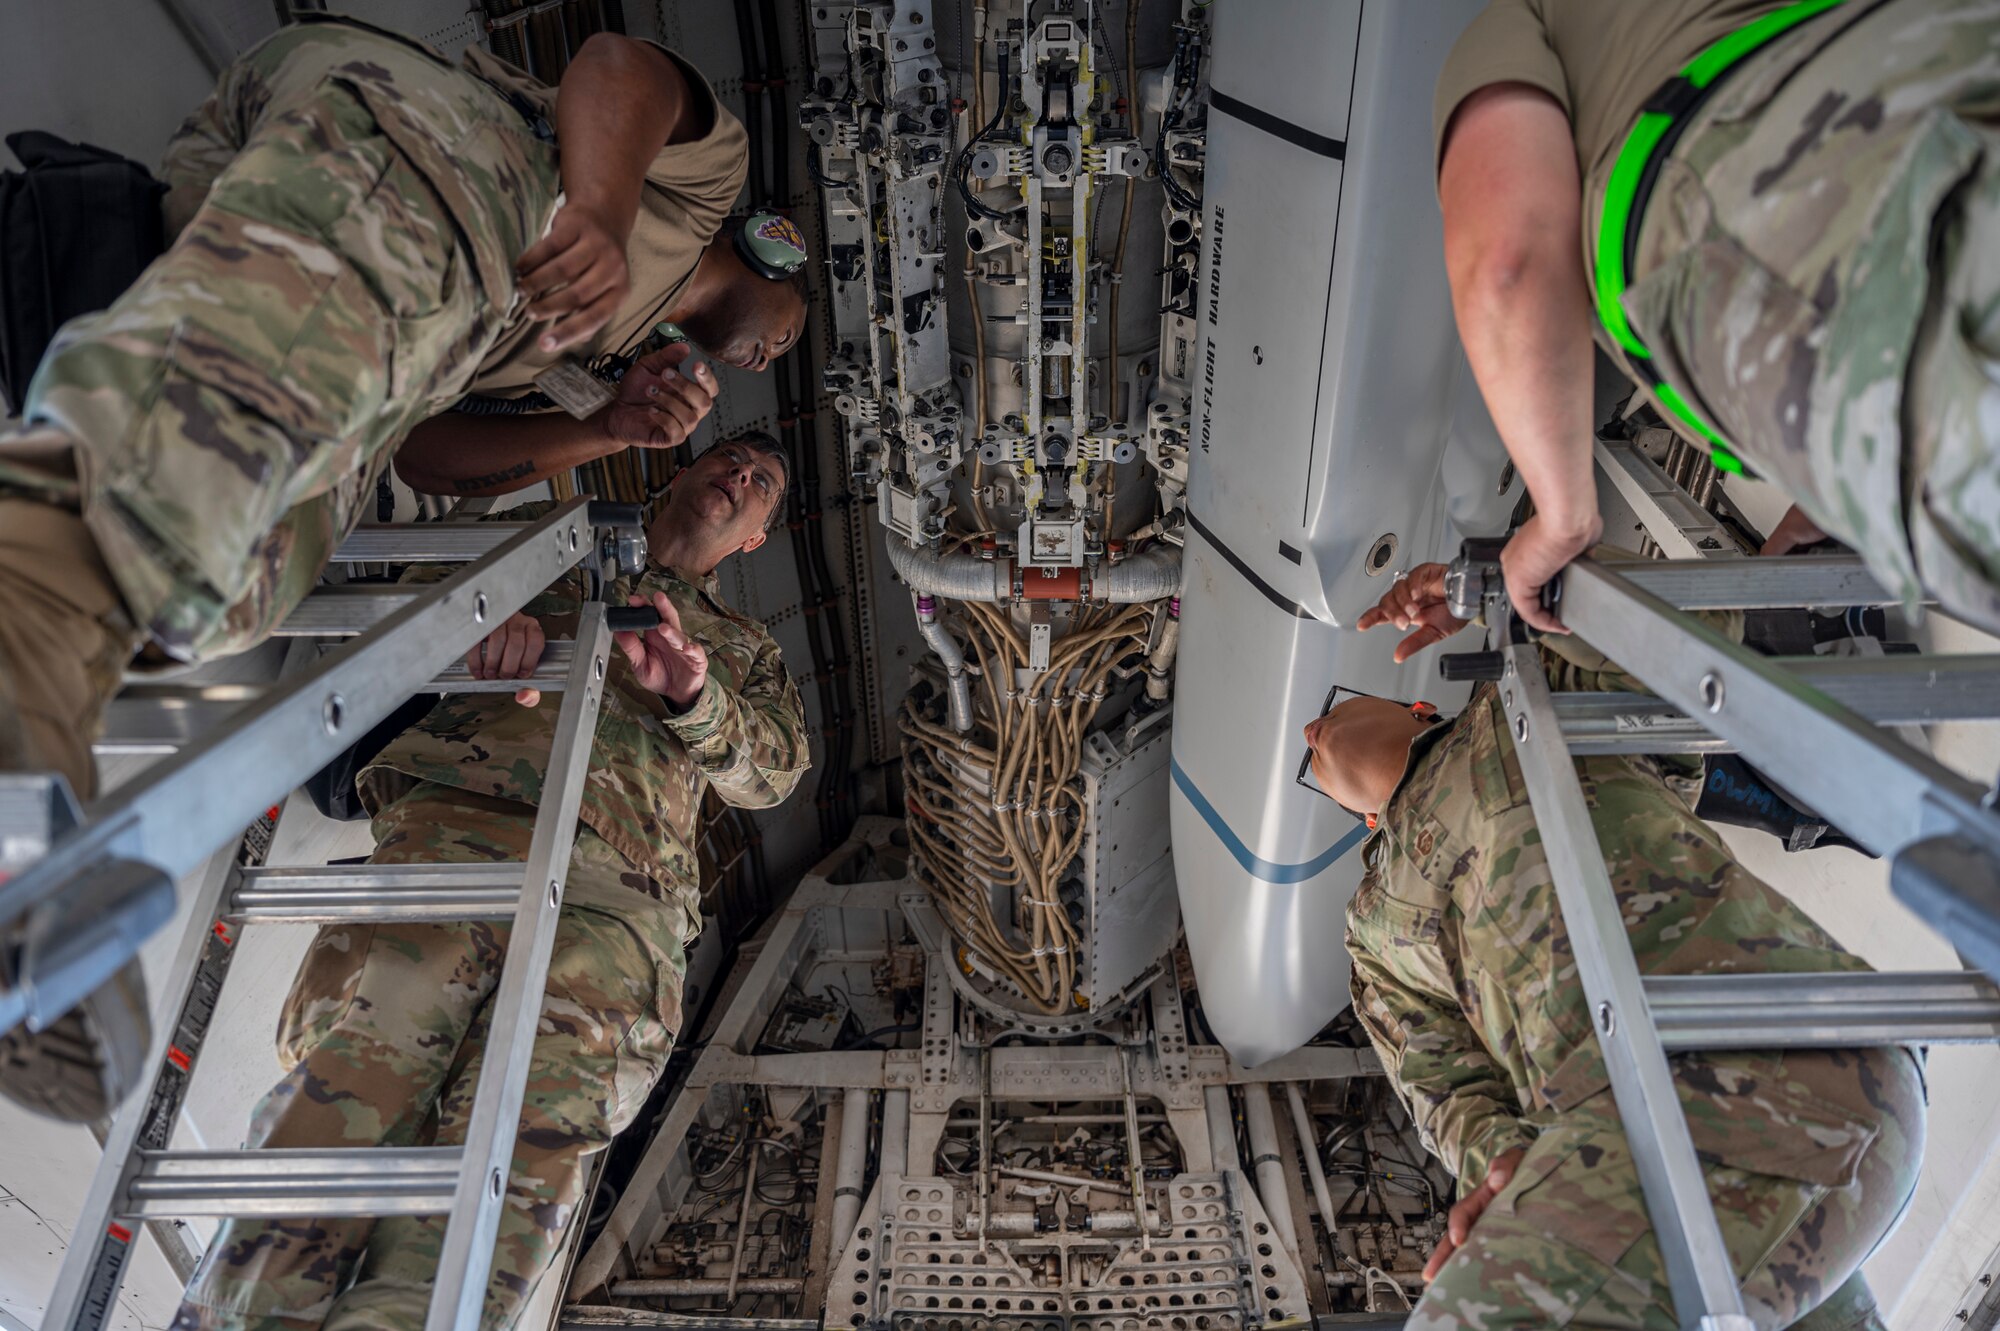 Maj. Gen. Andrew Gebara, 8th Air Force and Joint-Global Strike Operations Center commander, center left, and Chief Master Sgt. Melvina Smith, 8th AF command chief, center right, watch as Airmen assigned to the 7th Aircraft Maintenance Squadron load inert munitions into a B-1B Lancer during a weapons load exercise at Dyess Air Force Base, Texas, Aug. 23, 2021. The B-1 is a long-range strategic bomber capable of delivering precision and non-precision munitions to any location around the globe. (U.S. Air Force photo by Senior Airman Colin Hollowell)